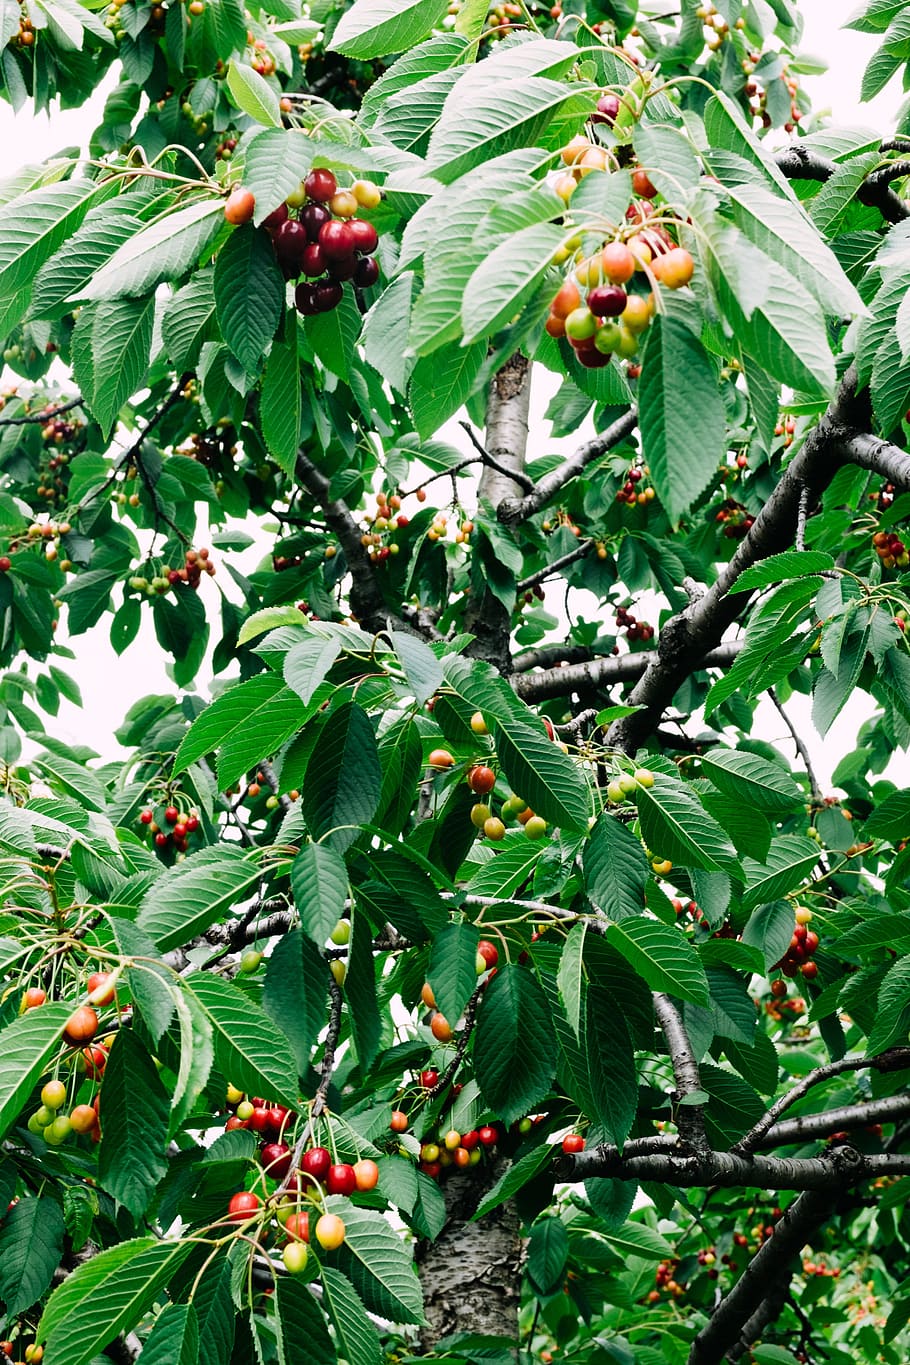 Cherries on tree, agriculture, background, berry, branch, bunch